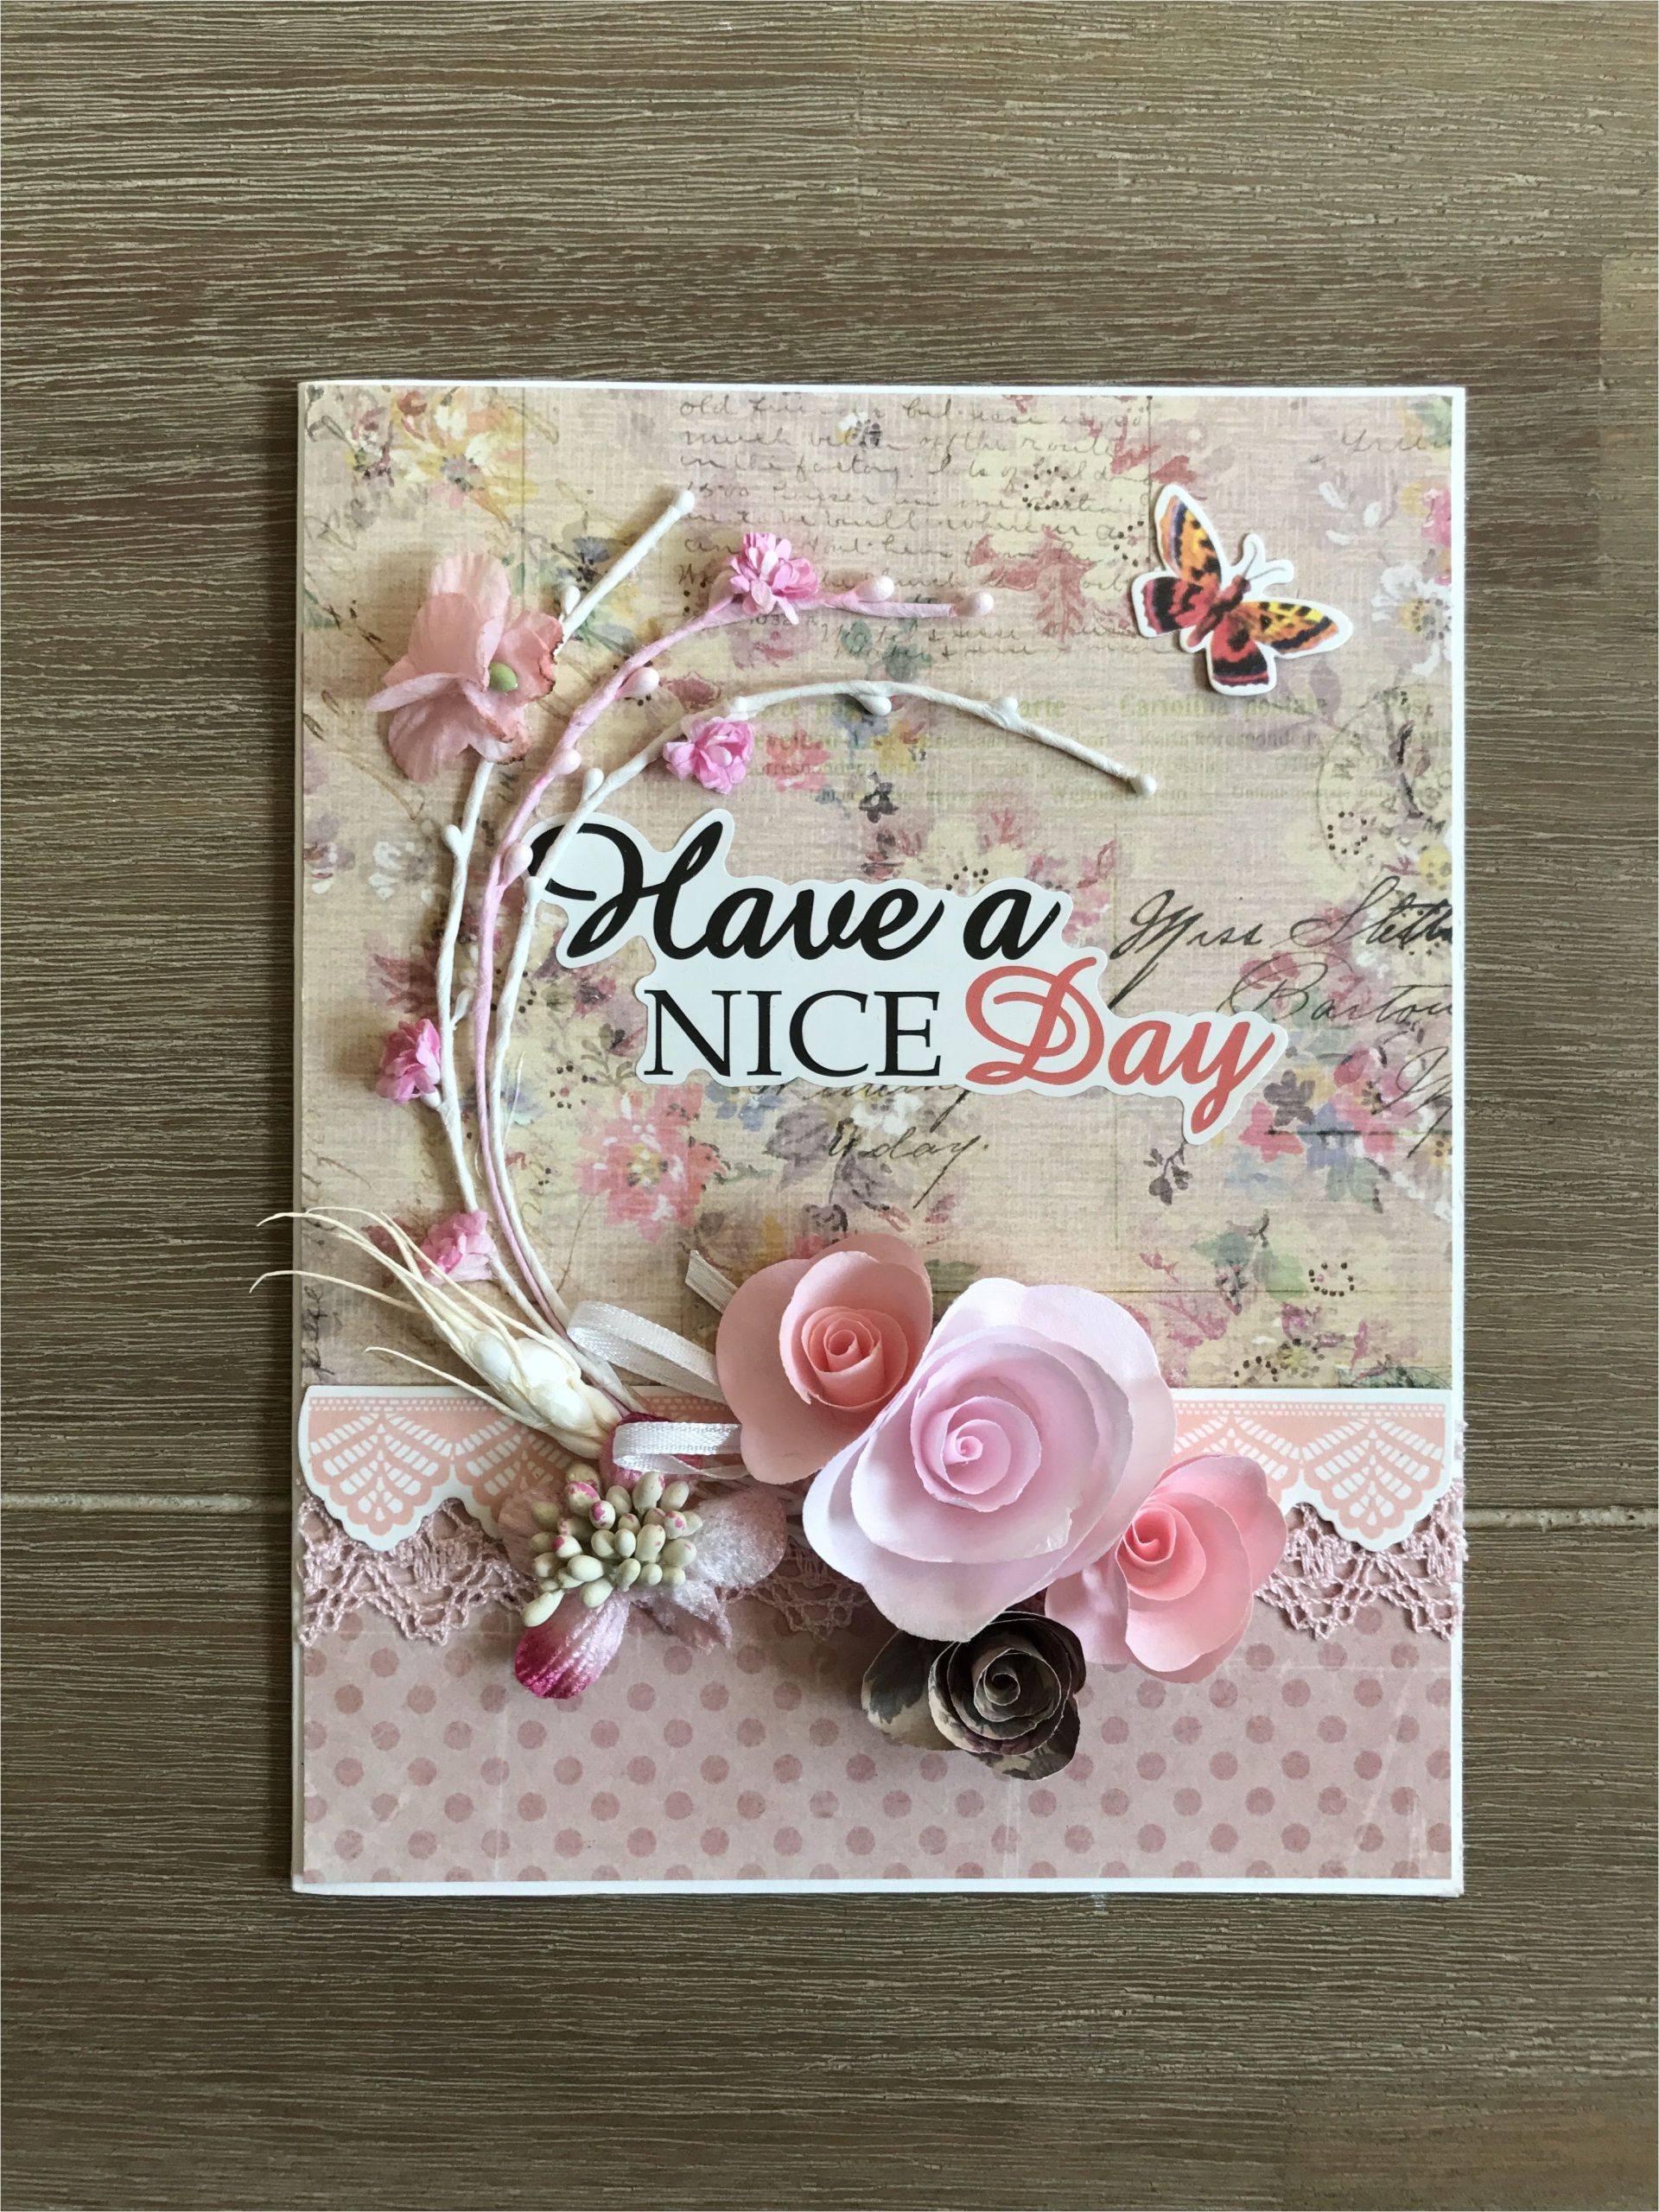 Greeting Card Beautiful Greeting Card Scrapbooking Greeting Card Birthday Card for Best Friend